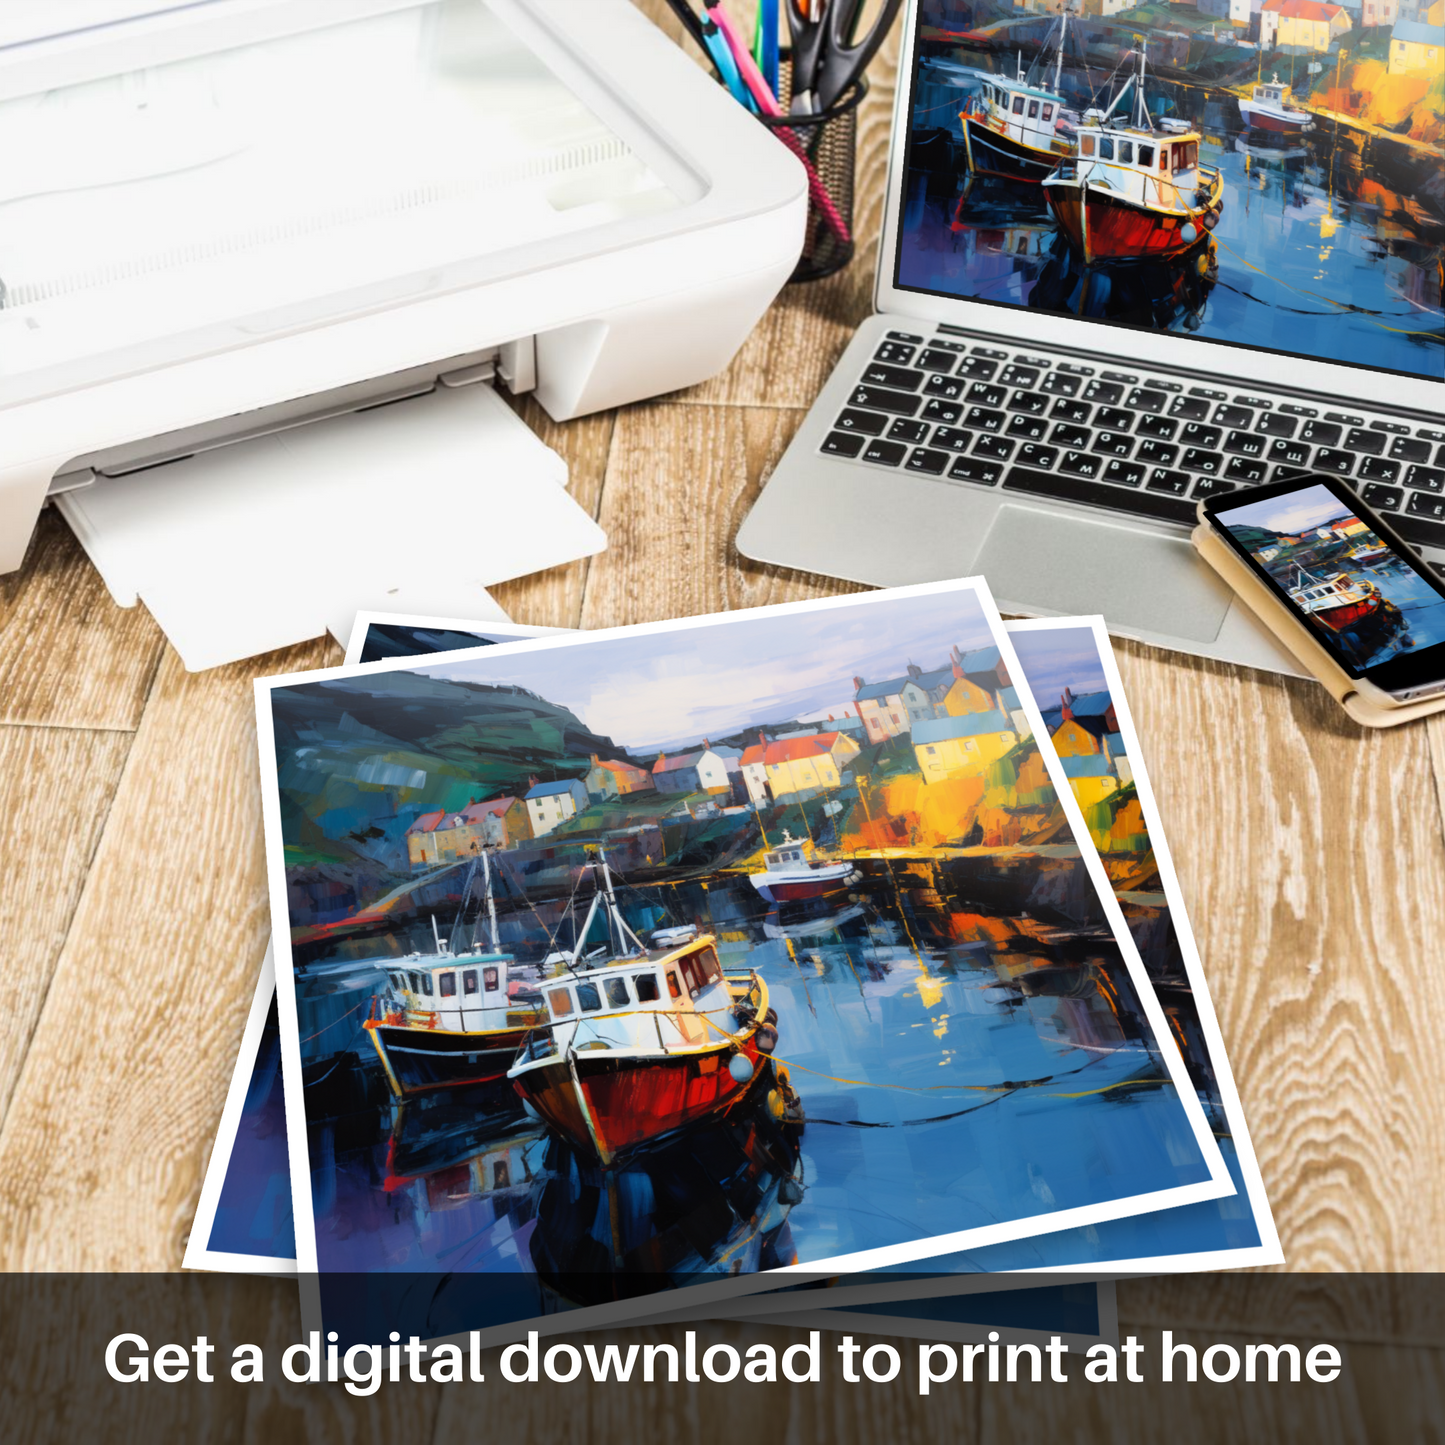 Downloadable and printable picture of Gardenstown Harbour at dusk